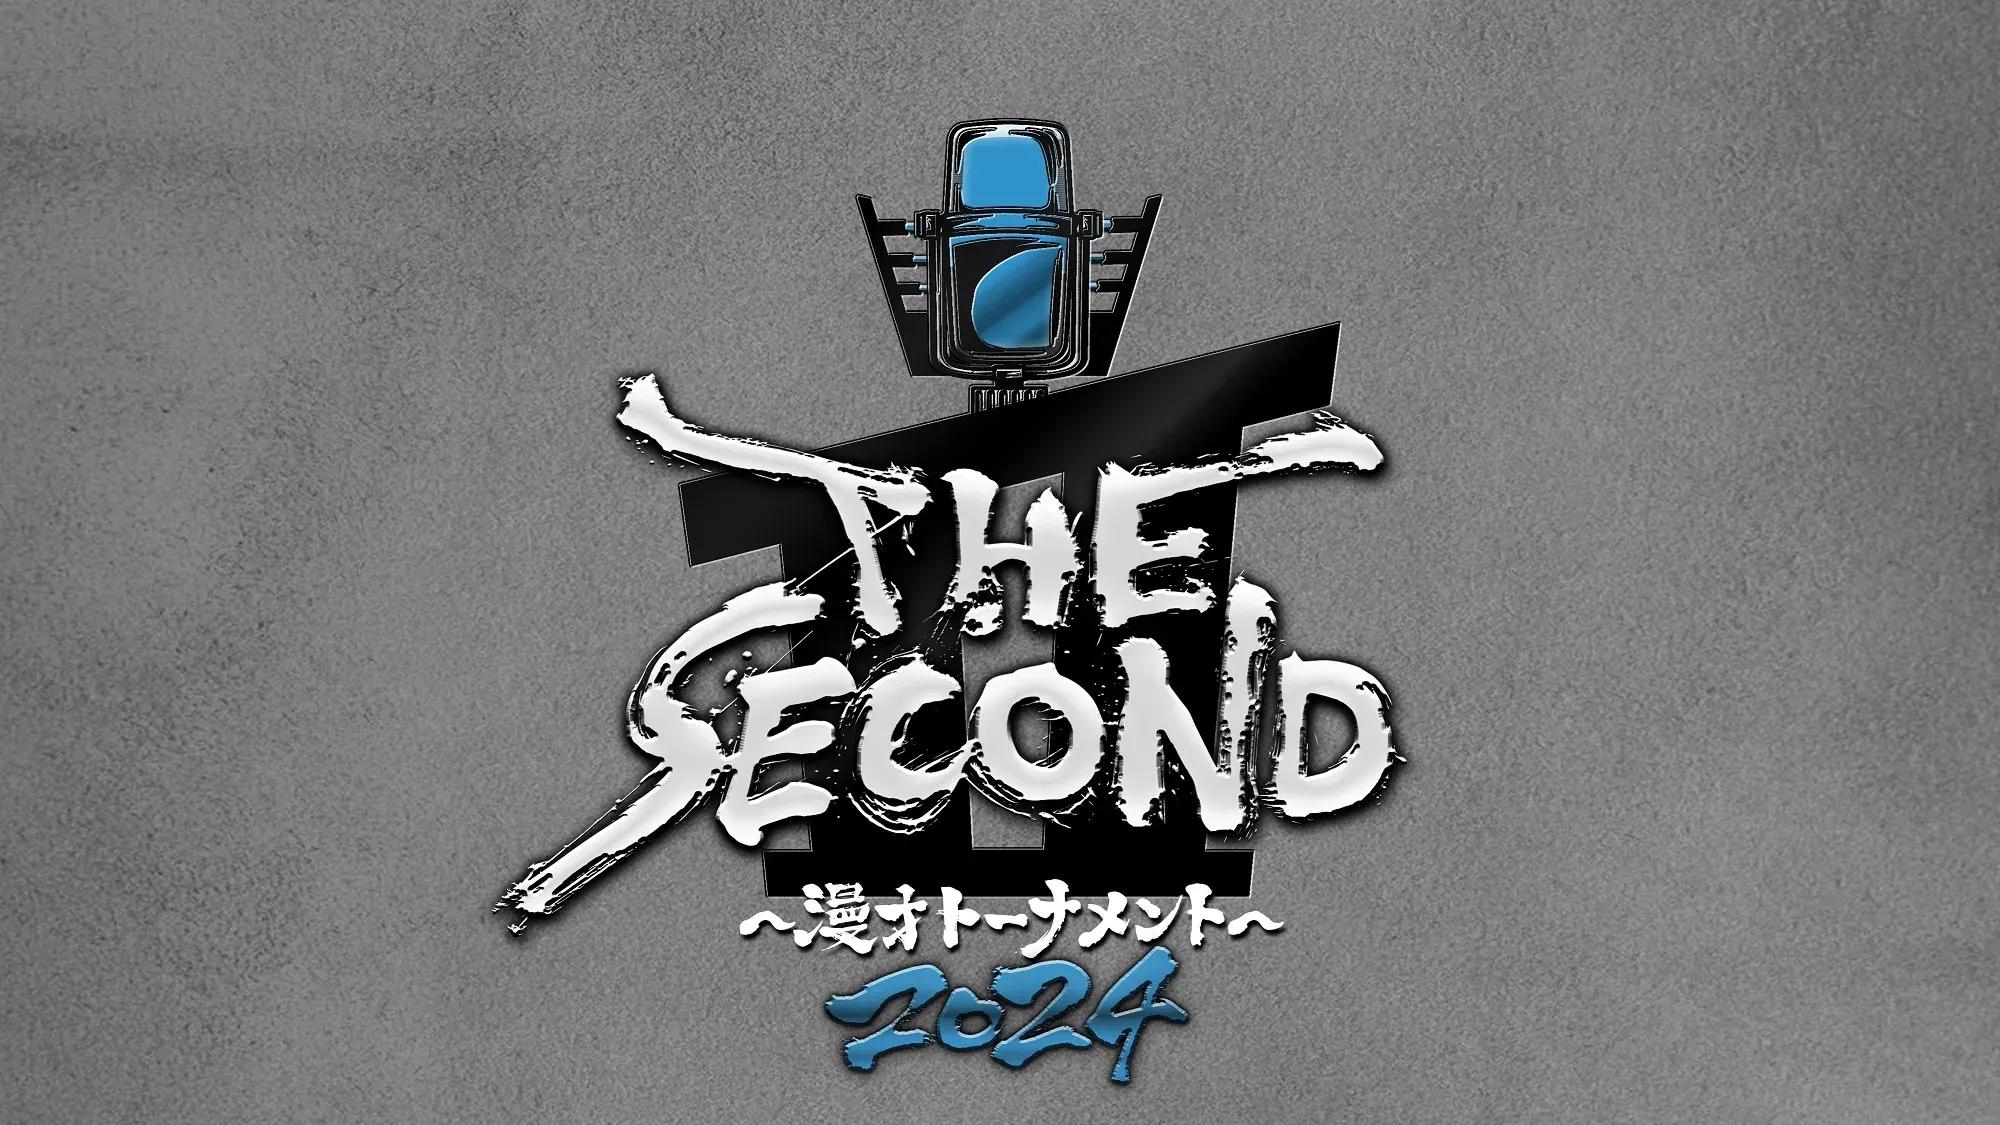 『THE SECOND～漫才トーナメント～』第2回大会の開催が決定！_bodies